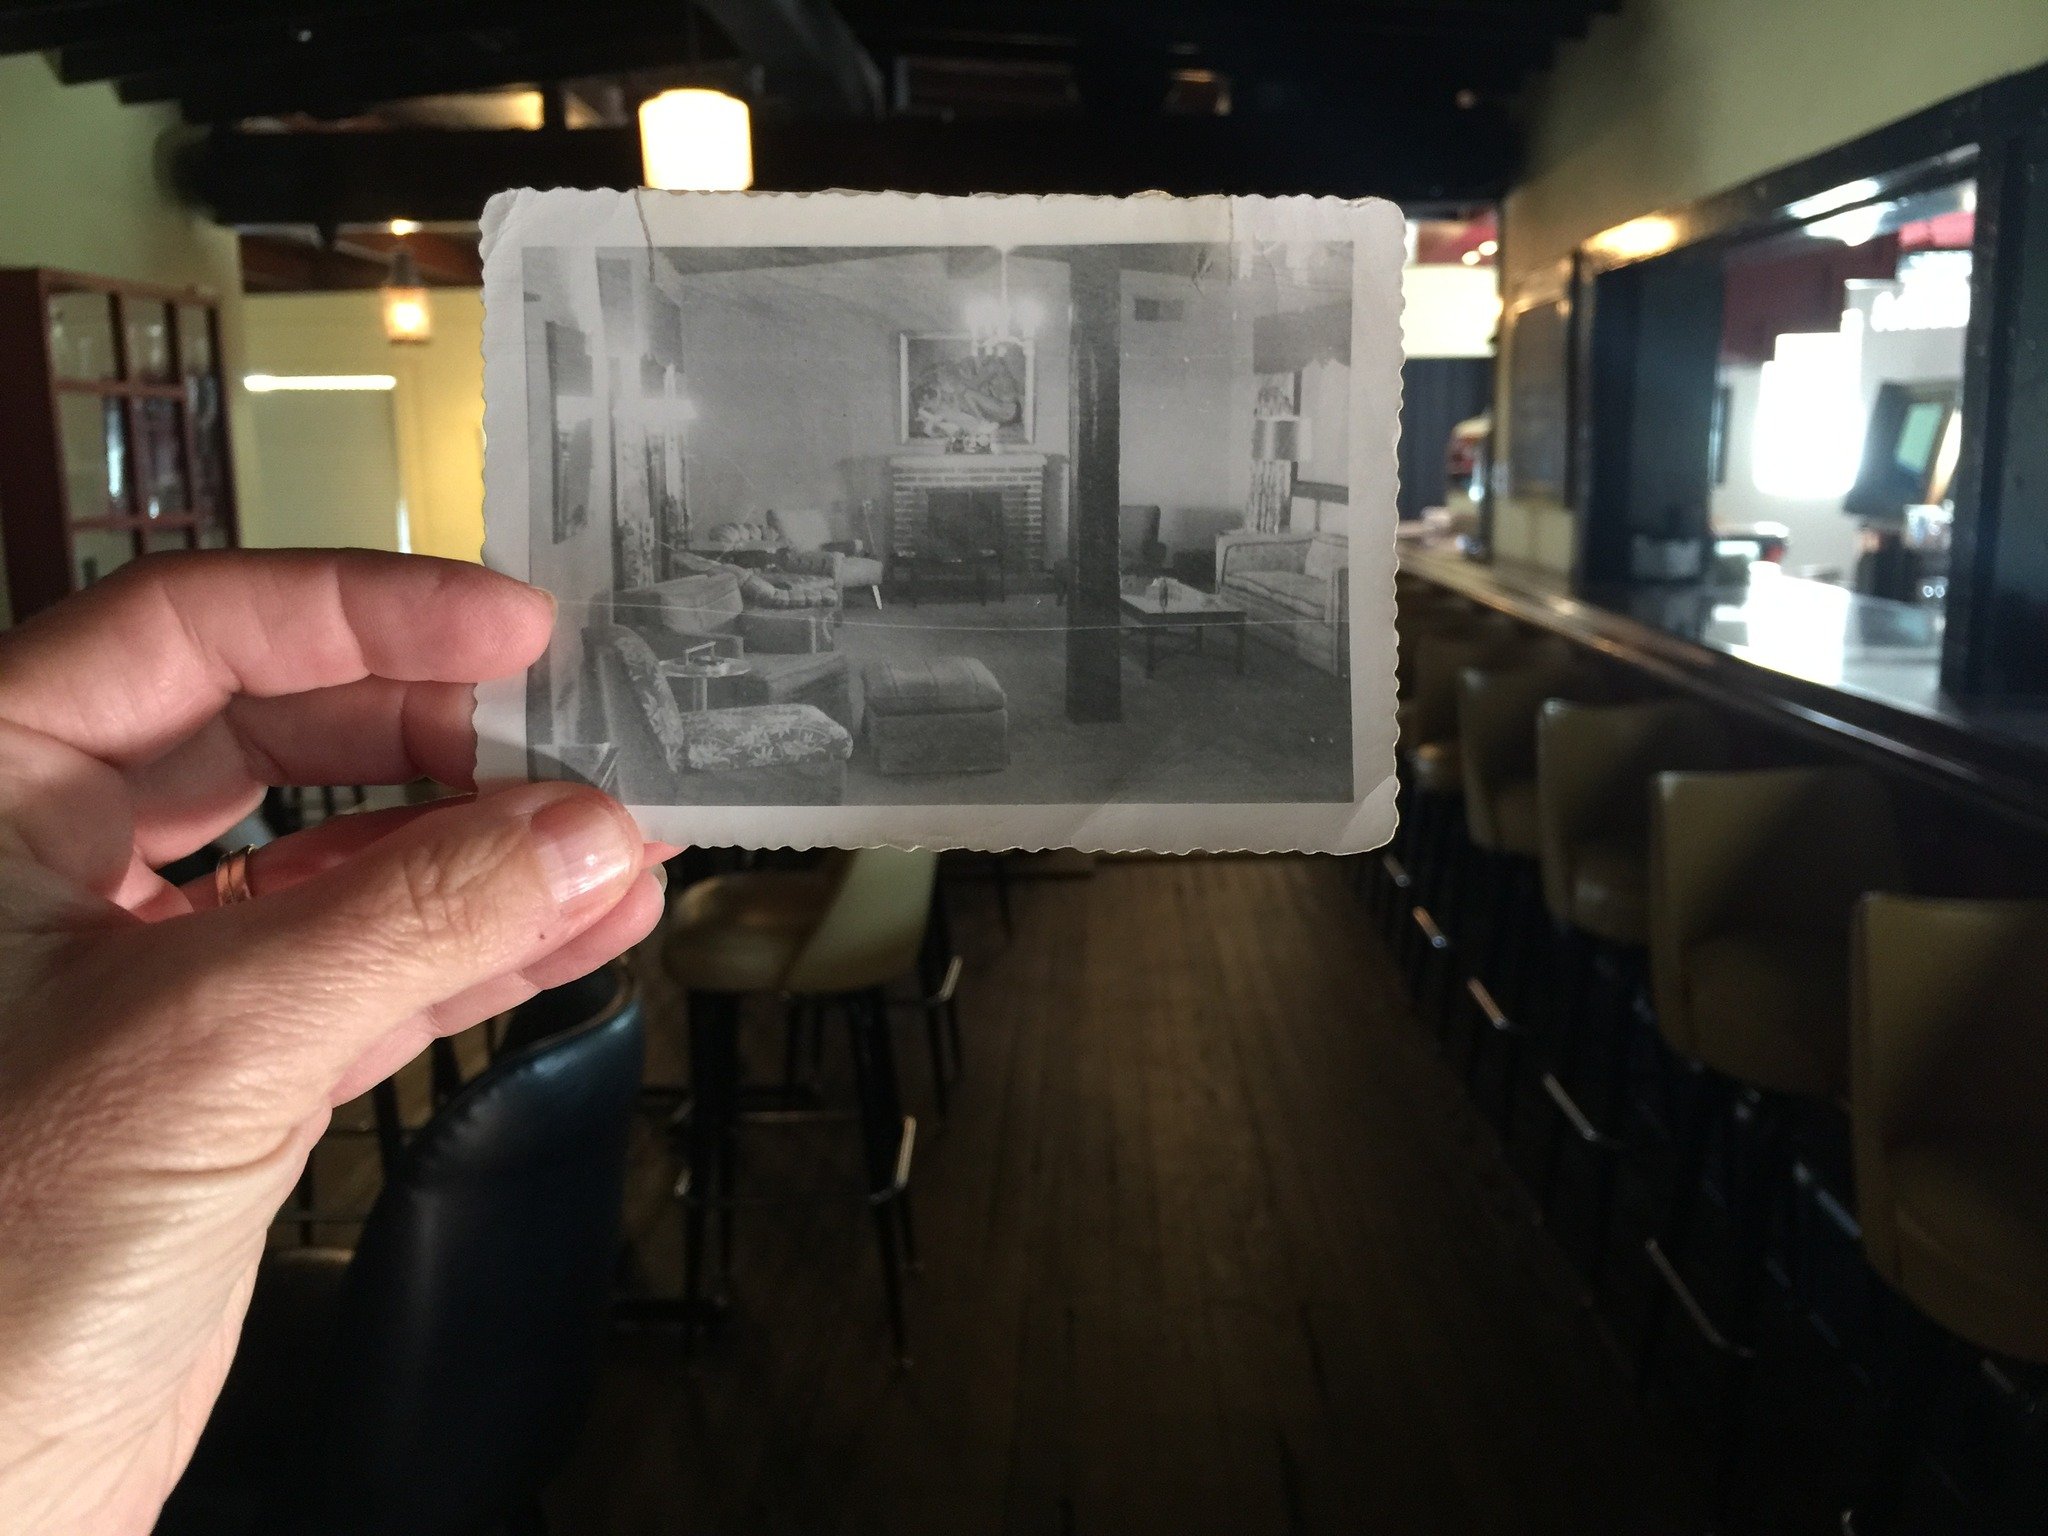 #TBT here is another throwback Thursday pic in pic! I am loving the furnishings of what was the living room of the house which is now our Mecca Lounge. What a transformation from then until now! #ardovinosdc #elpasotx #sunlandparknm #TBT #adcbackinth